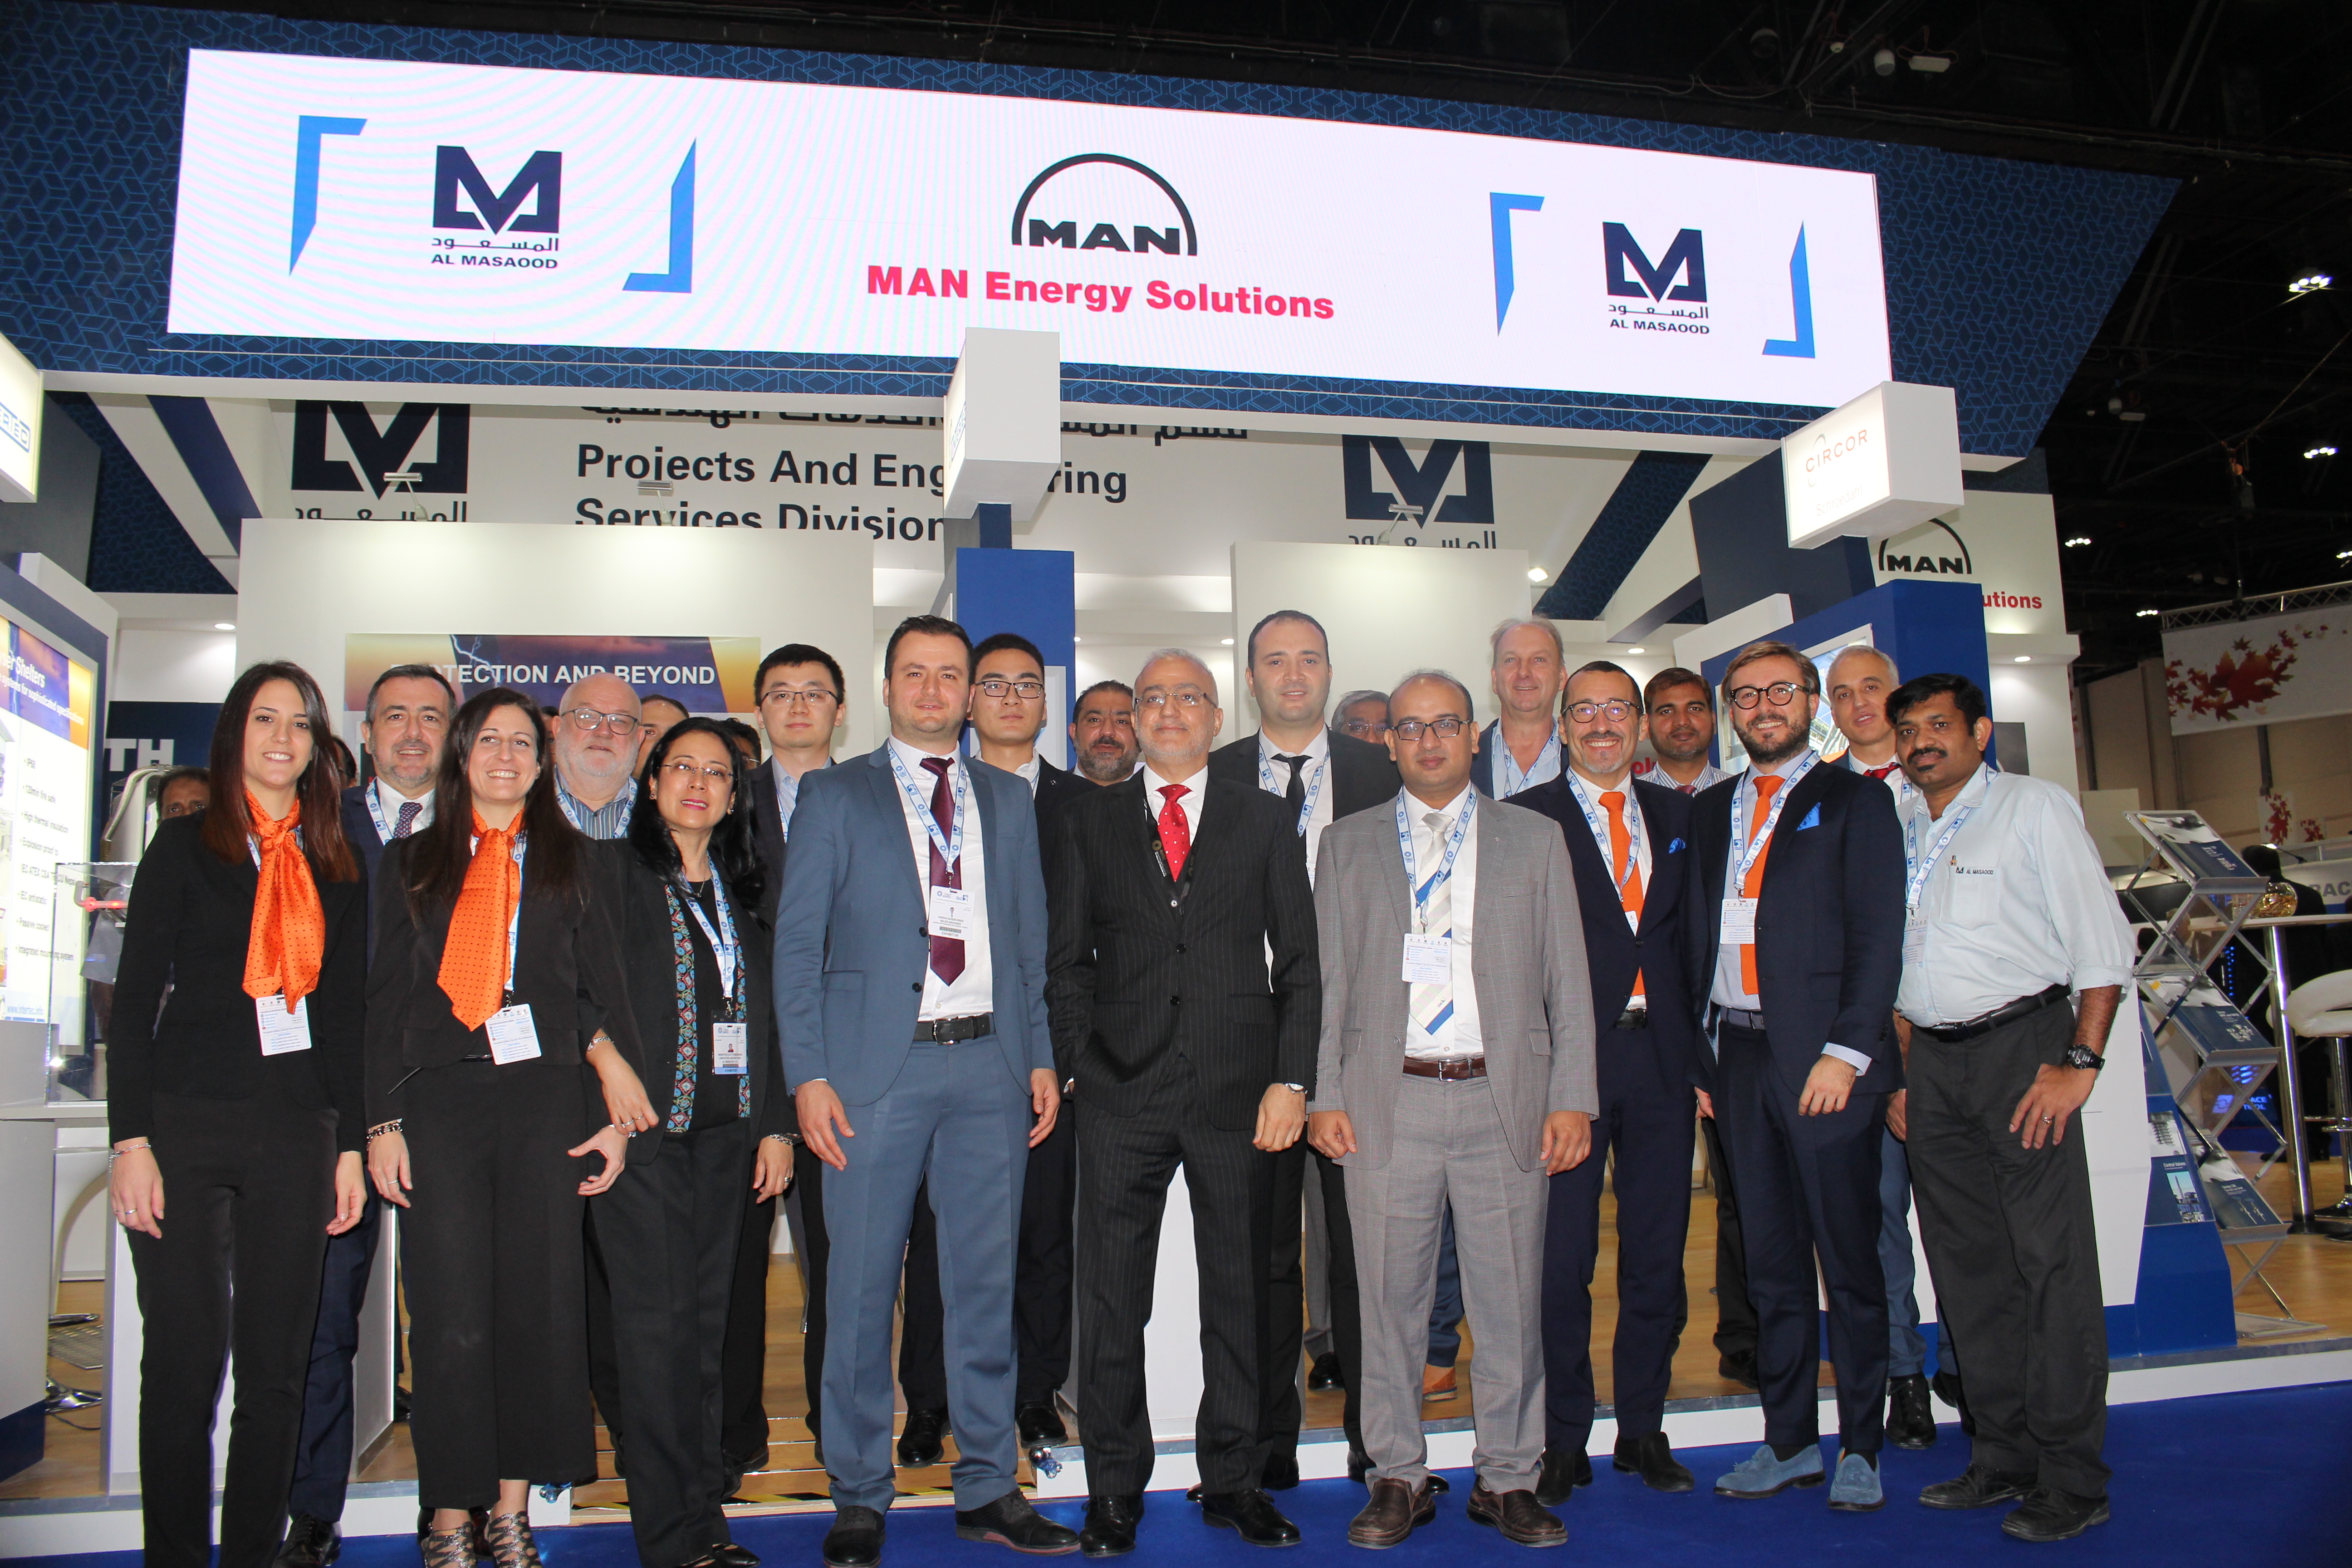 Al Masaood’s Projects & Engineering Services Division highlights its technology-driven energy solutions at ADIPEC 2019